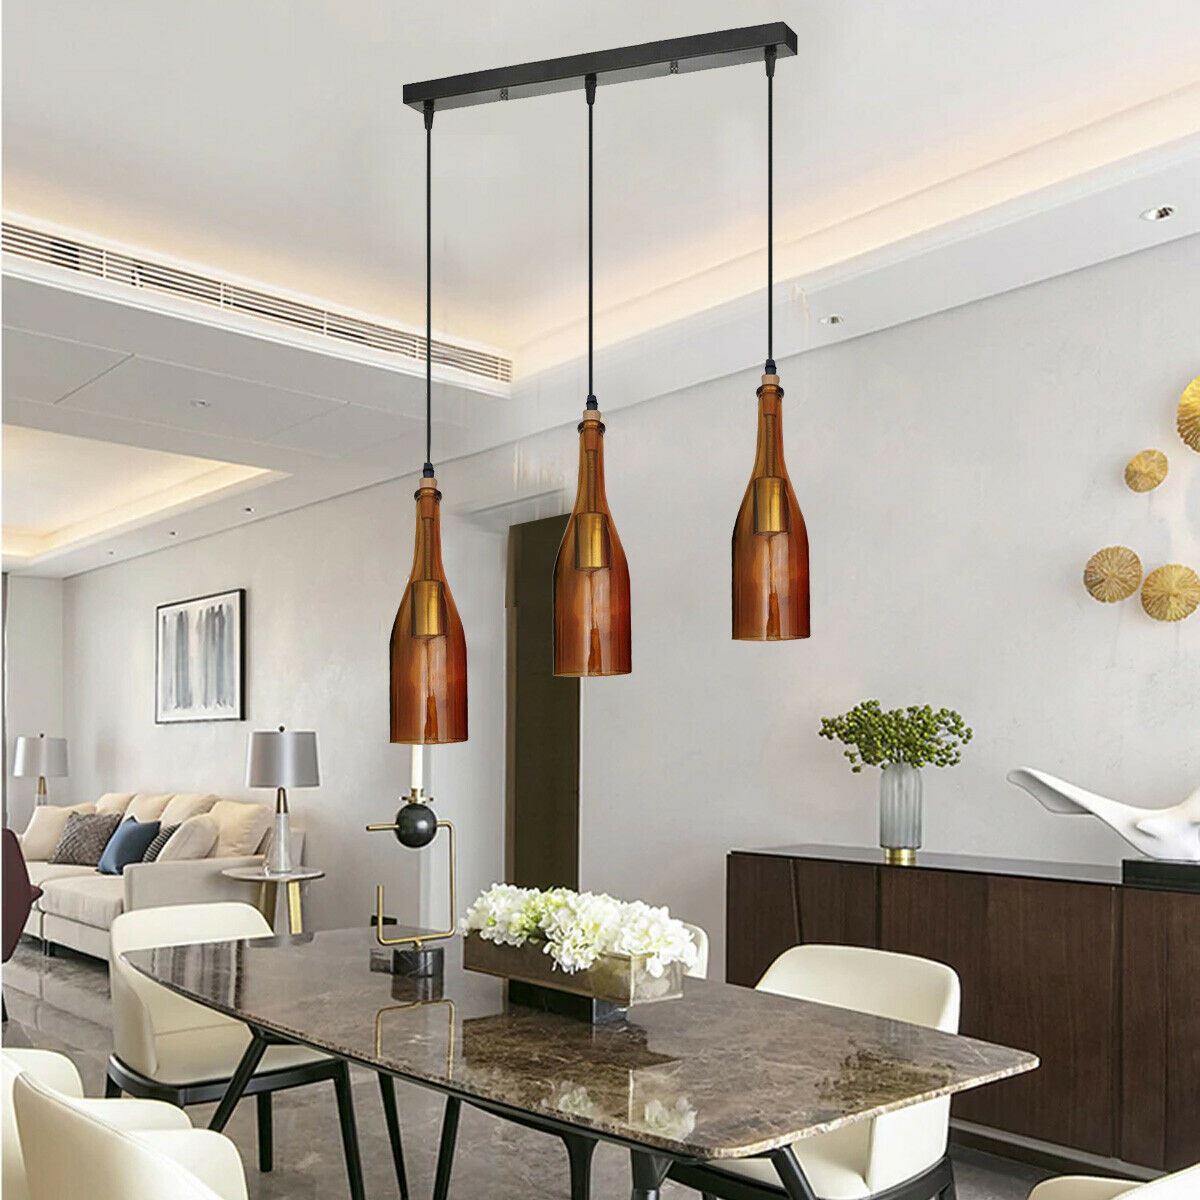 Industrial 3 or 5 Wine Bottle Cord Ceiling Hanging Pendant Light~2130